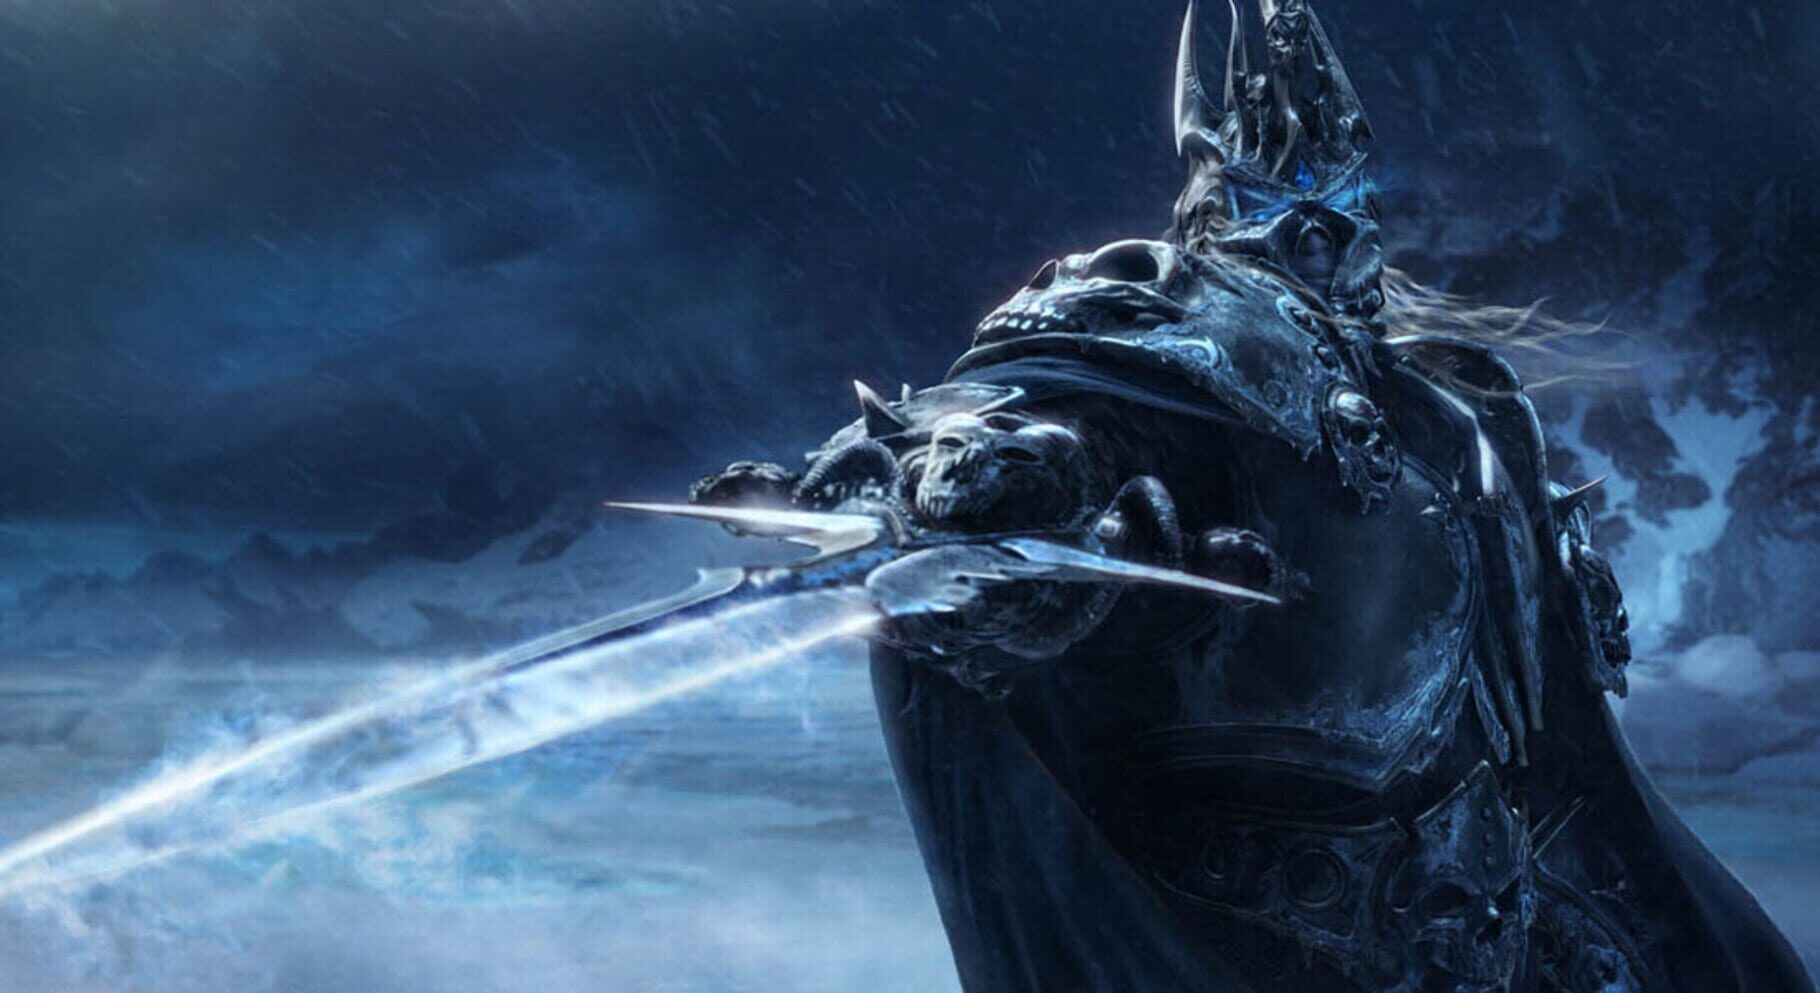 Arte - World of Warcraft: Wrath of the Lich King